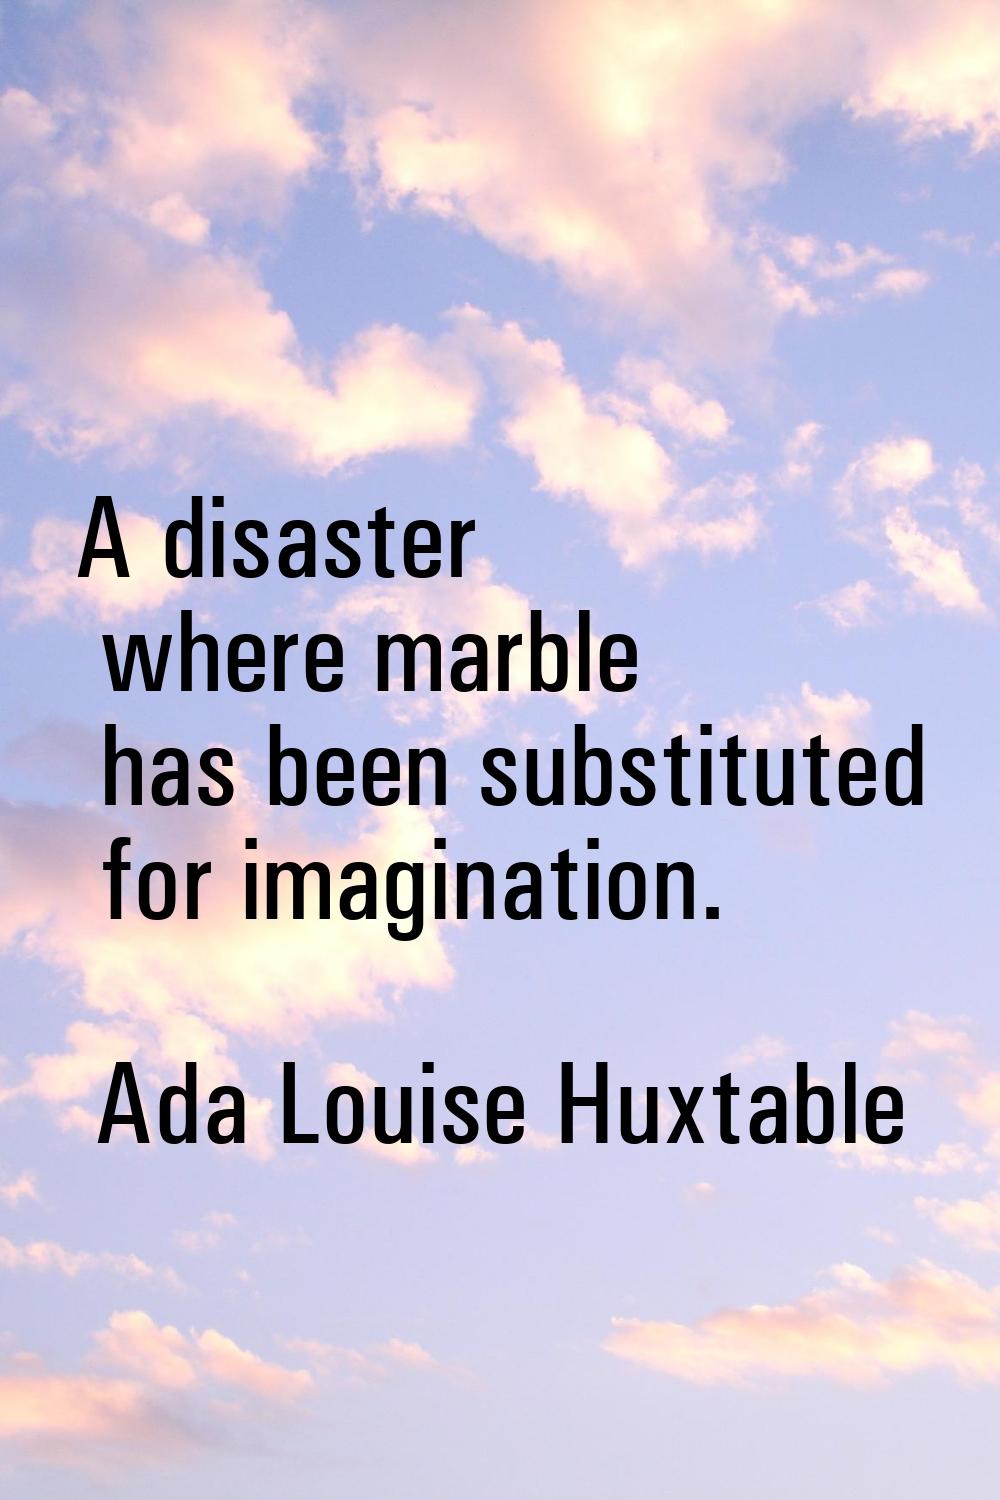 A disaster where marble has been substituted for imagination.